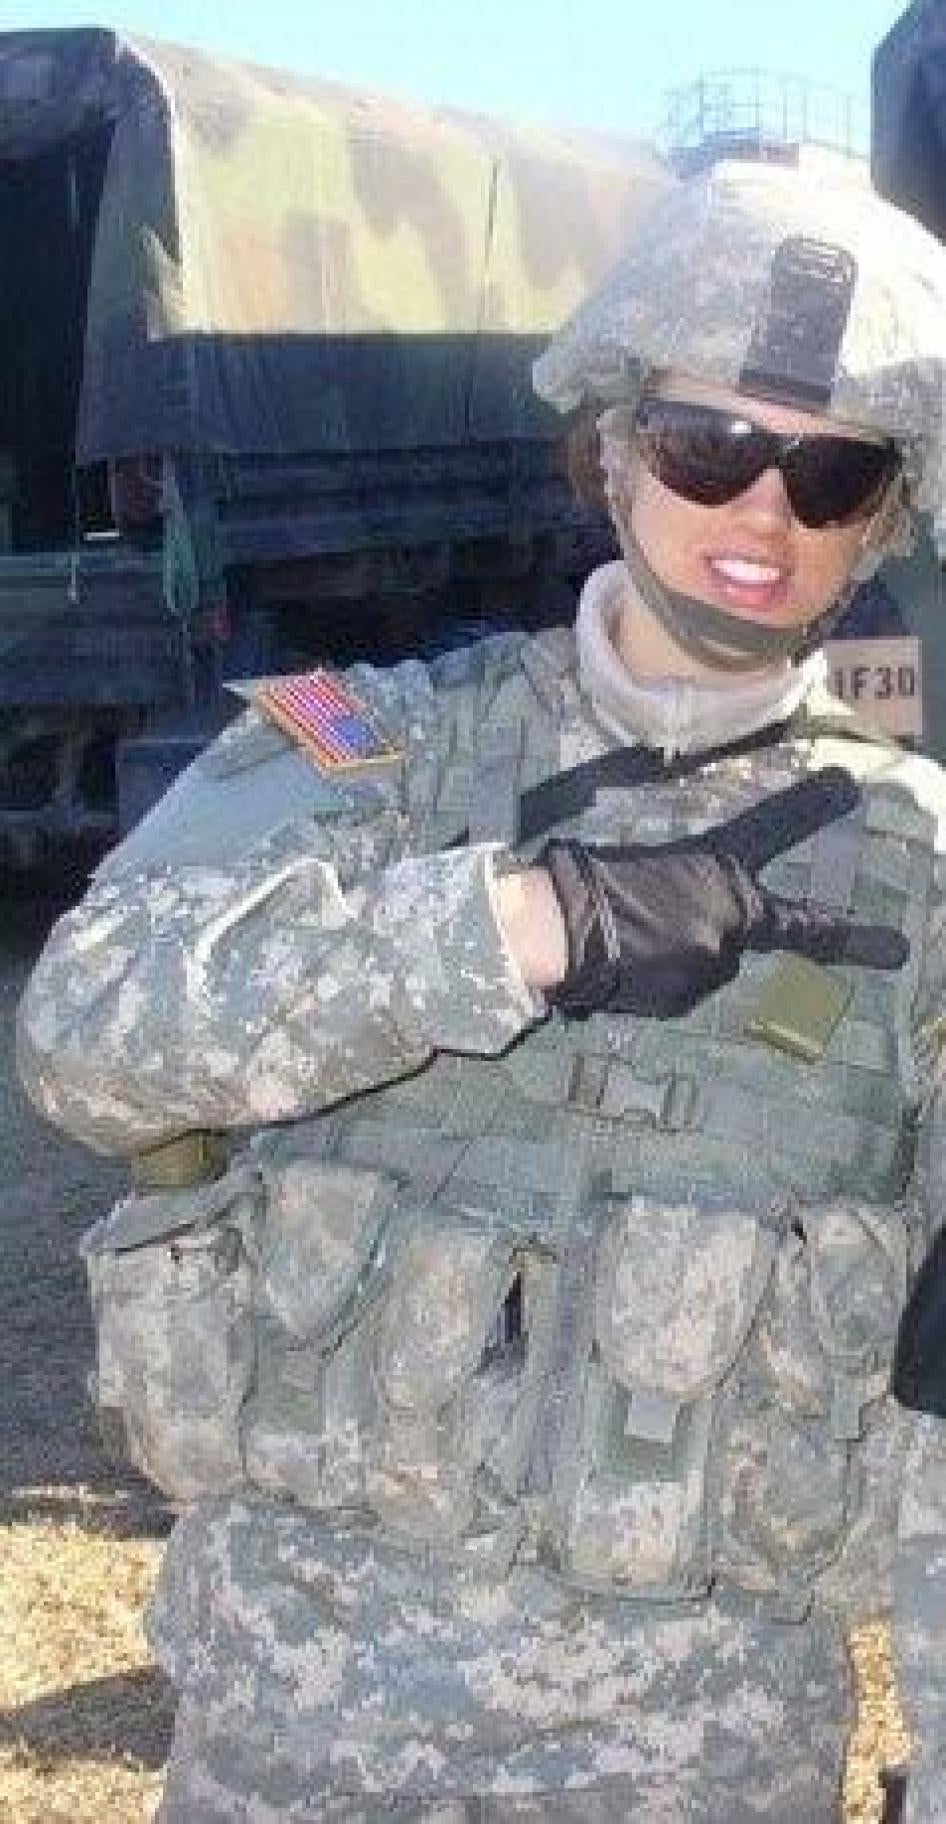 LT Gray at Basic Officer Leader Course II in January 2008.